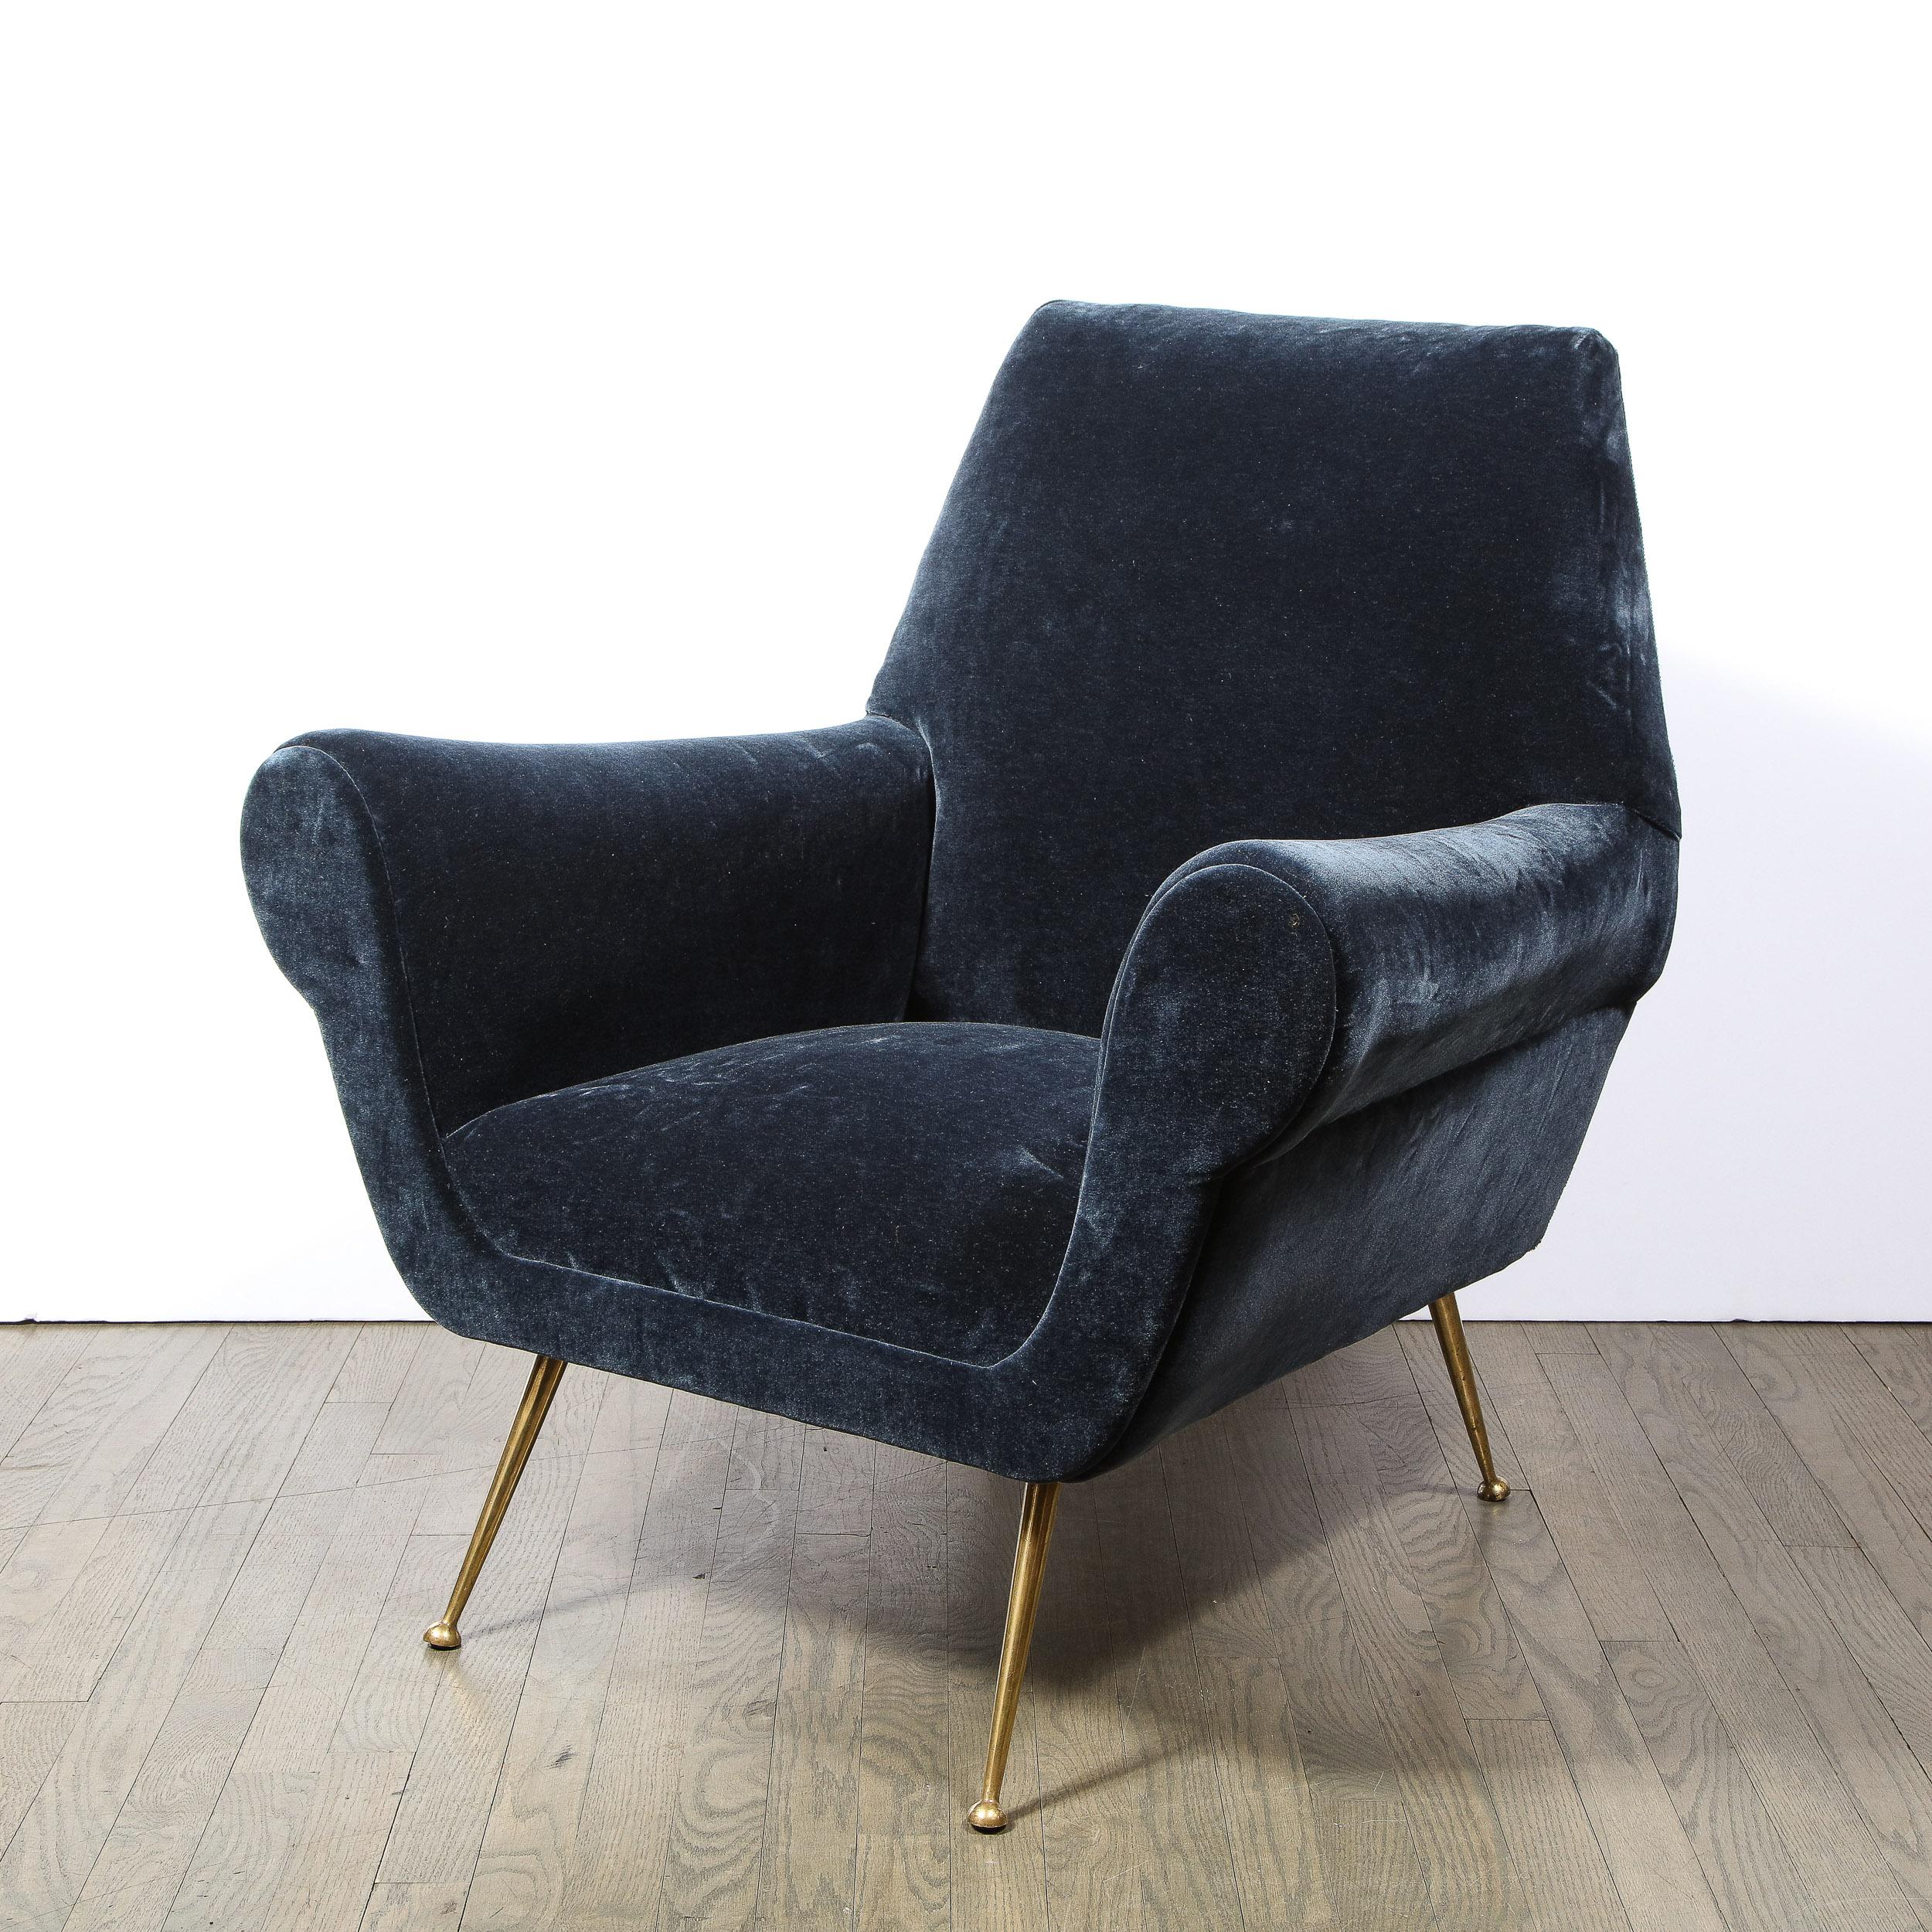 Italian Pair of Mid-Century Modern Marco Zanuso Lounge Chairs with Sculptural Brass Legs